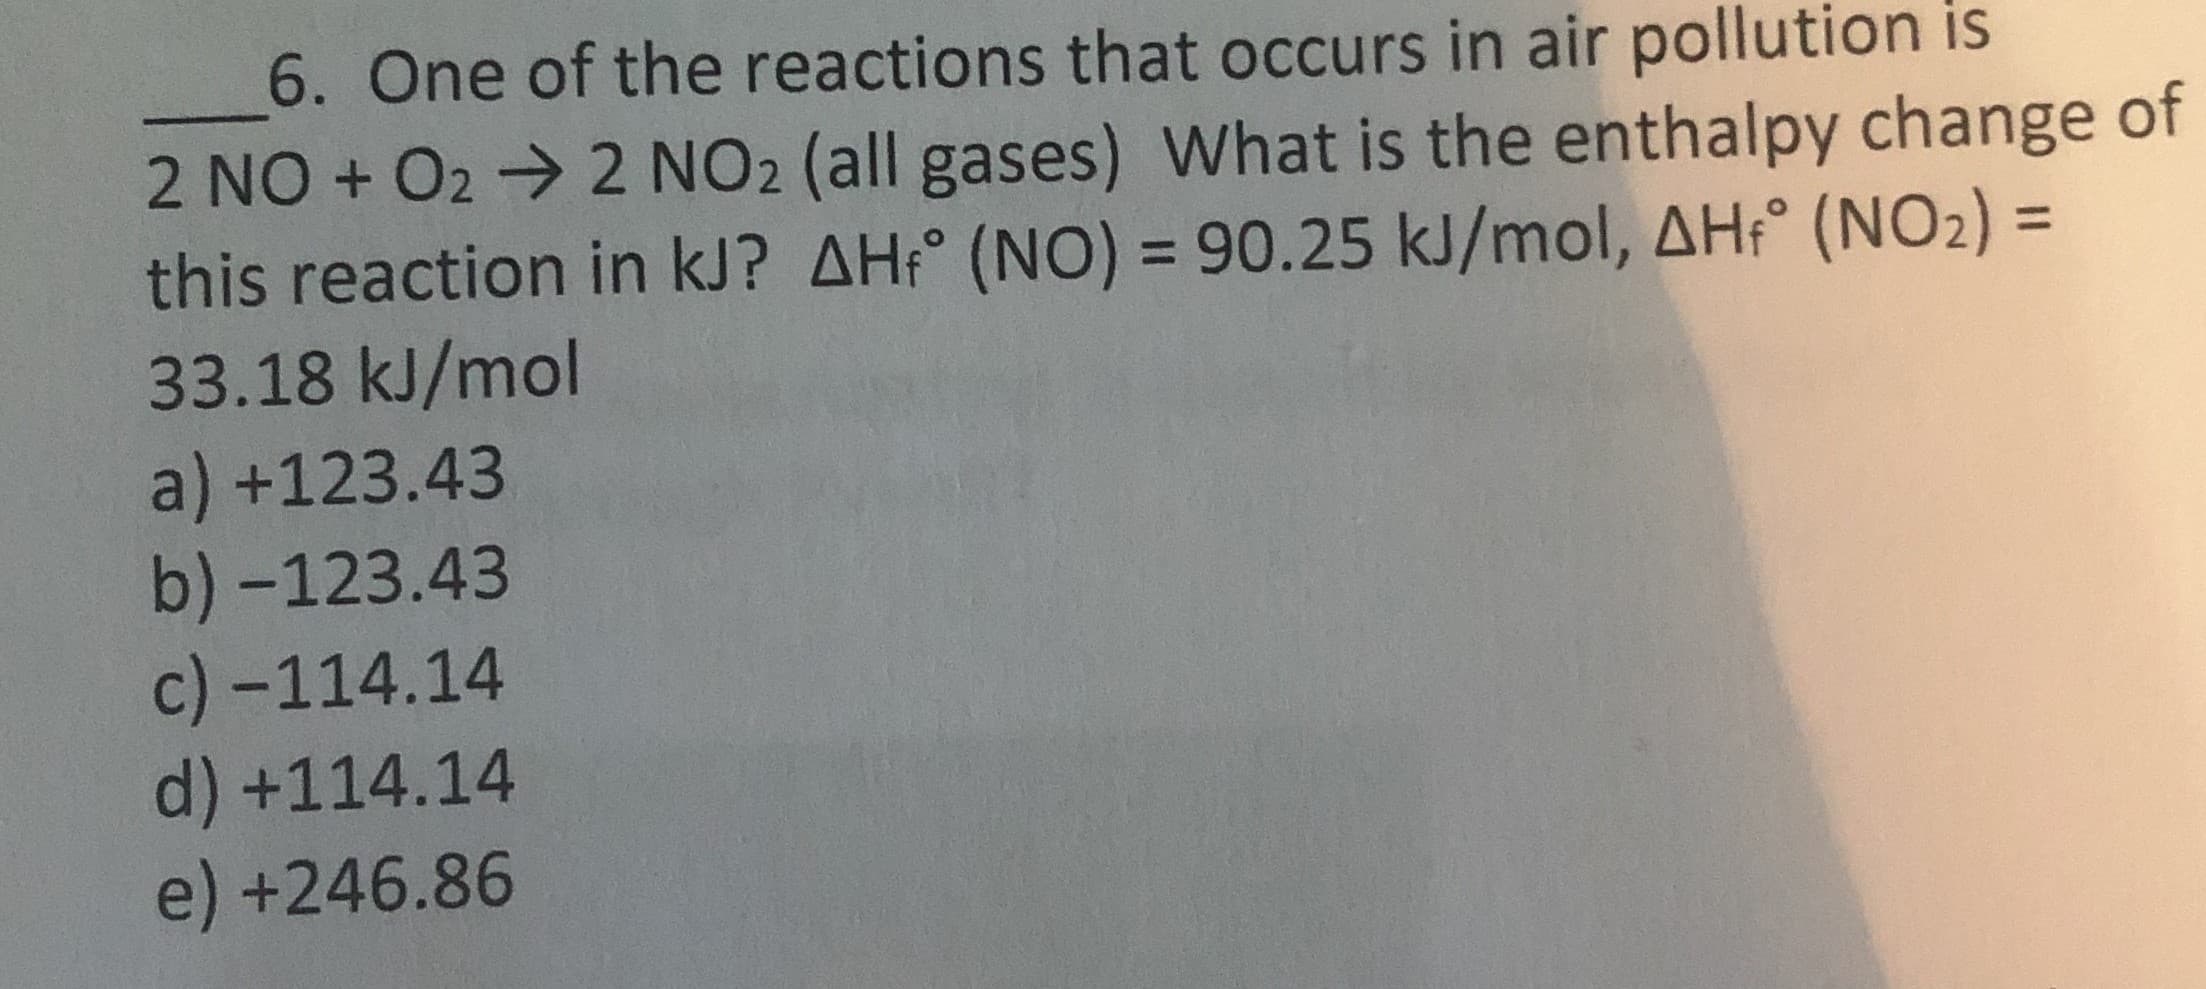 6. One of the reactions that occurs in air pollution is
2 NO + 02 → 2 NO2 (all gases) What is the enthalpy change of
this reaction in kJ? AH;° (NO) = 90.25 kJ/mol, AH:° (NO2) =
33.18 kJ/mol
a) +123.43
b) -123.43
c) -114.14
d) +114.14
e) +246.86
%3D
%3D
